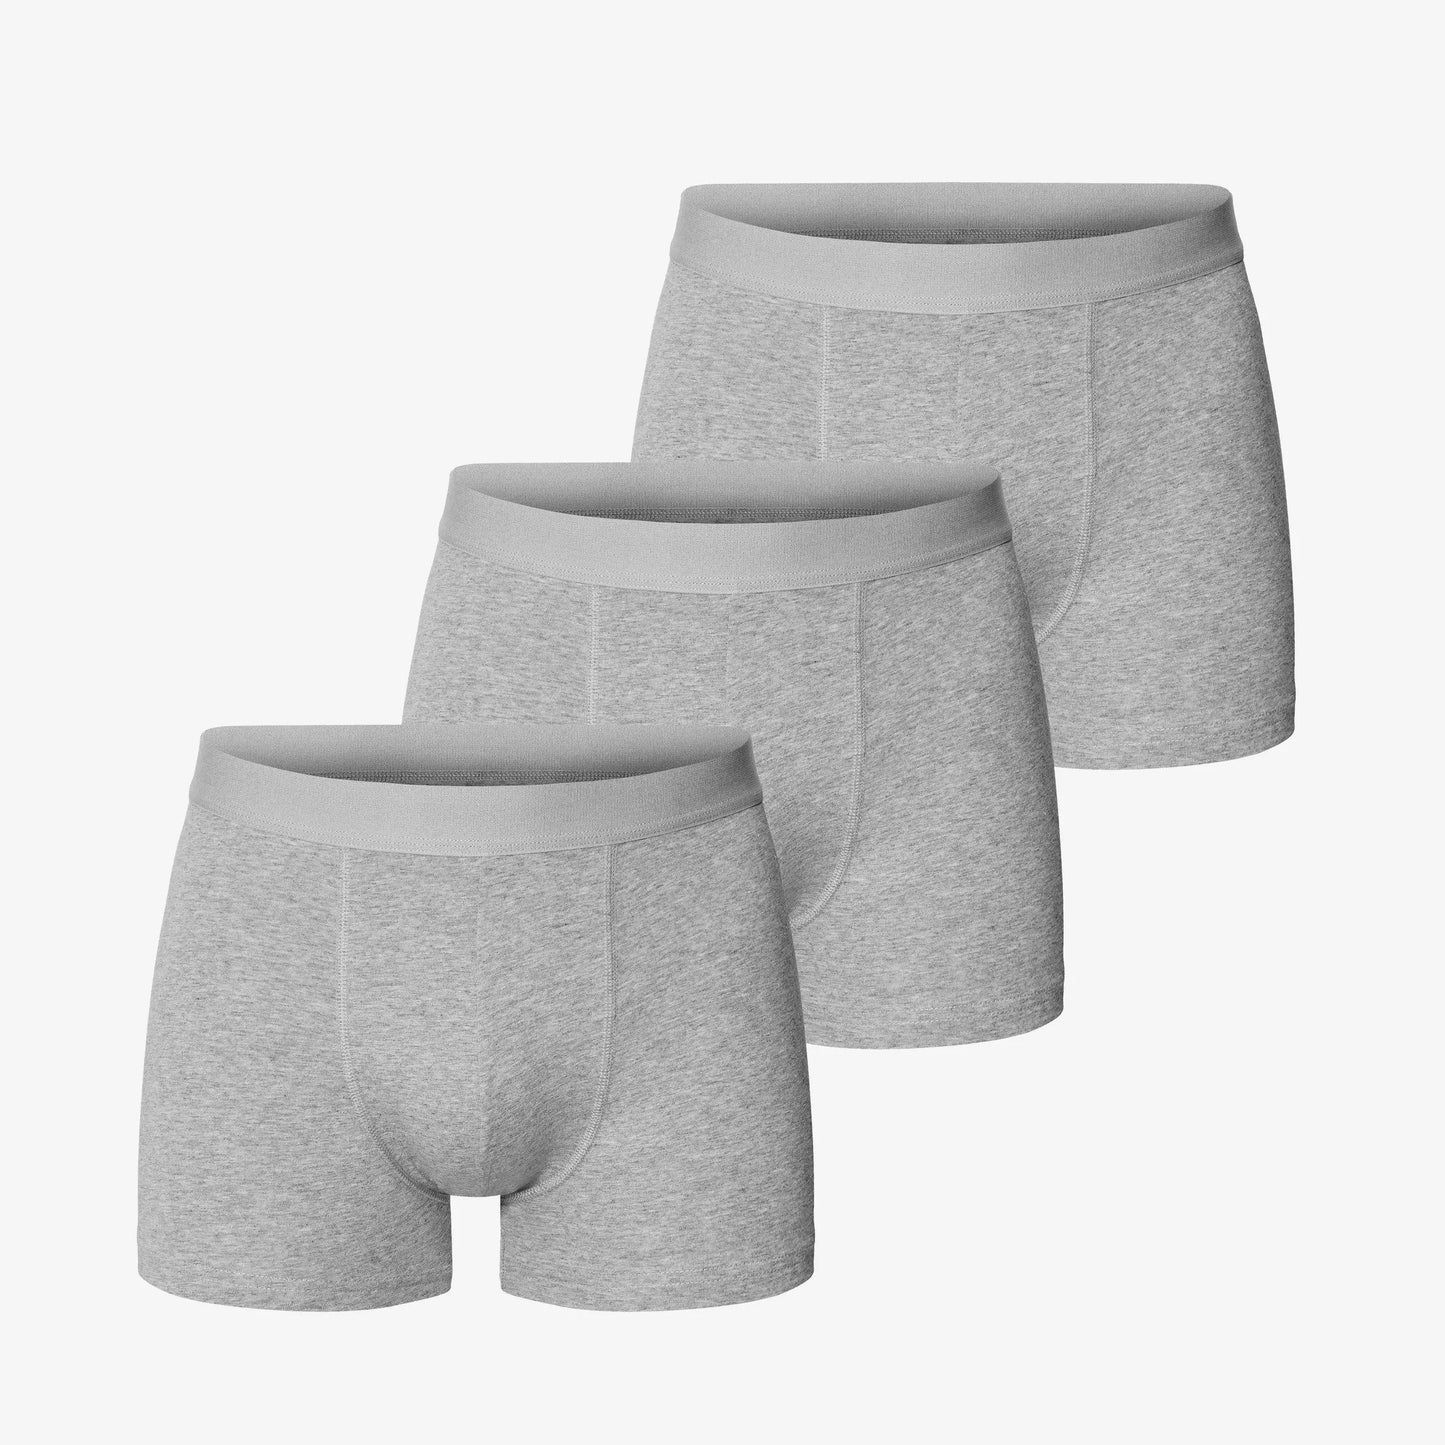 Bread &amp; Boxers - Pack of 3 Boxers - Gray